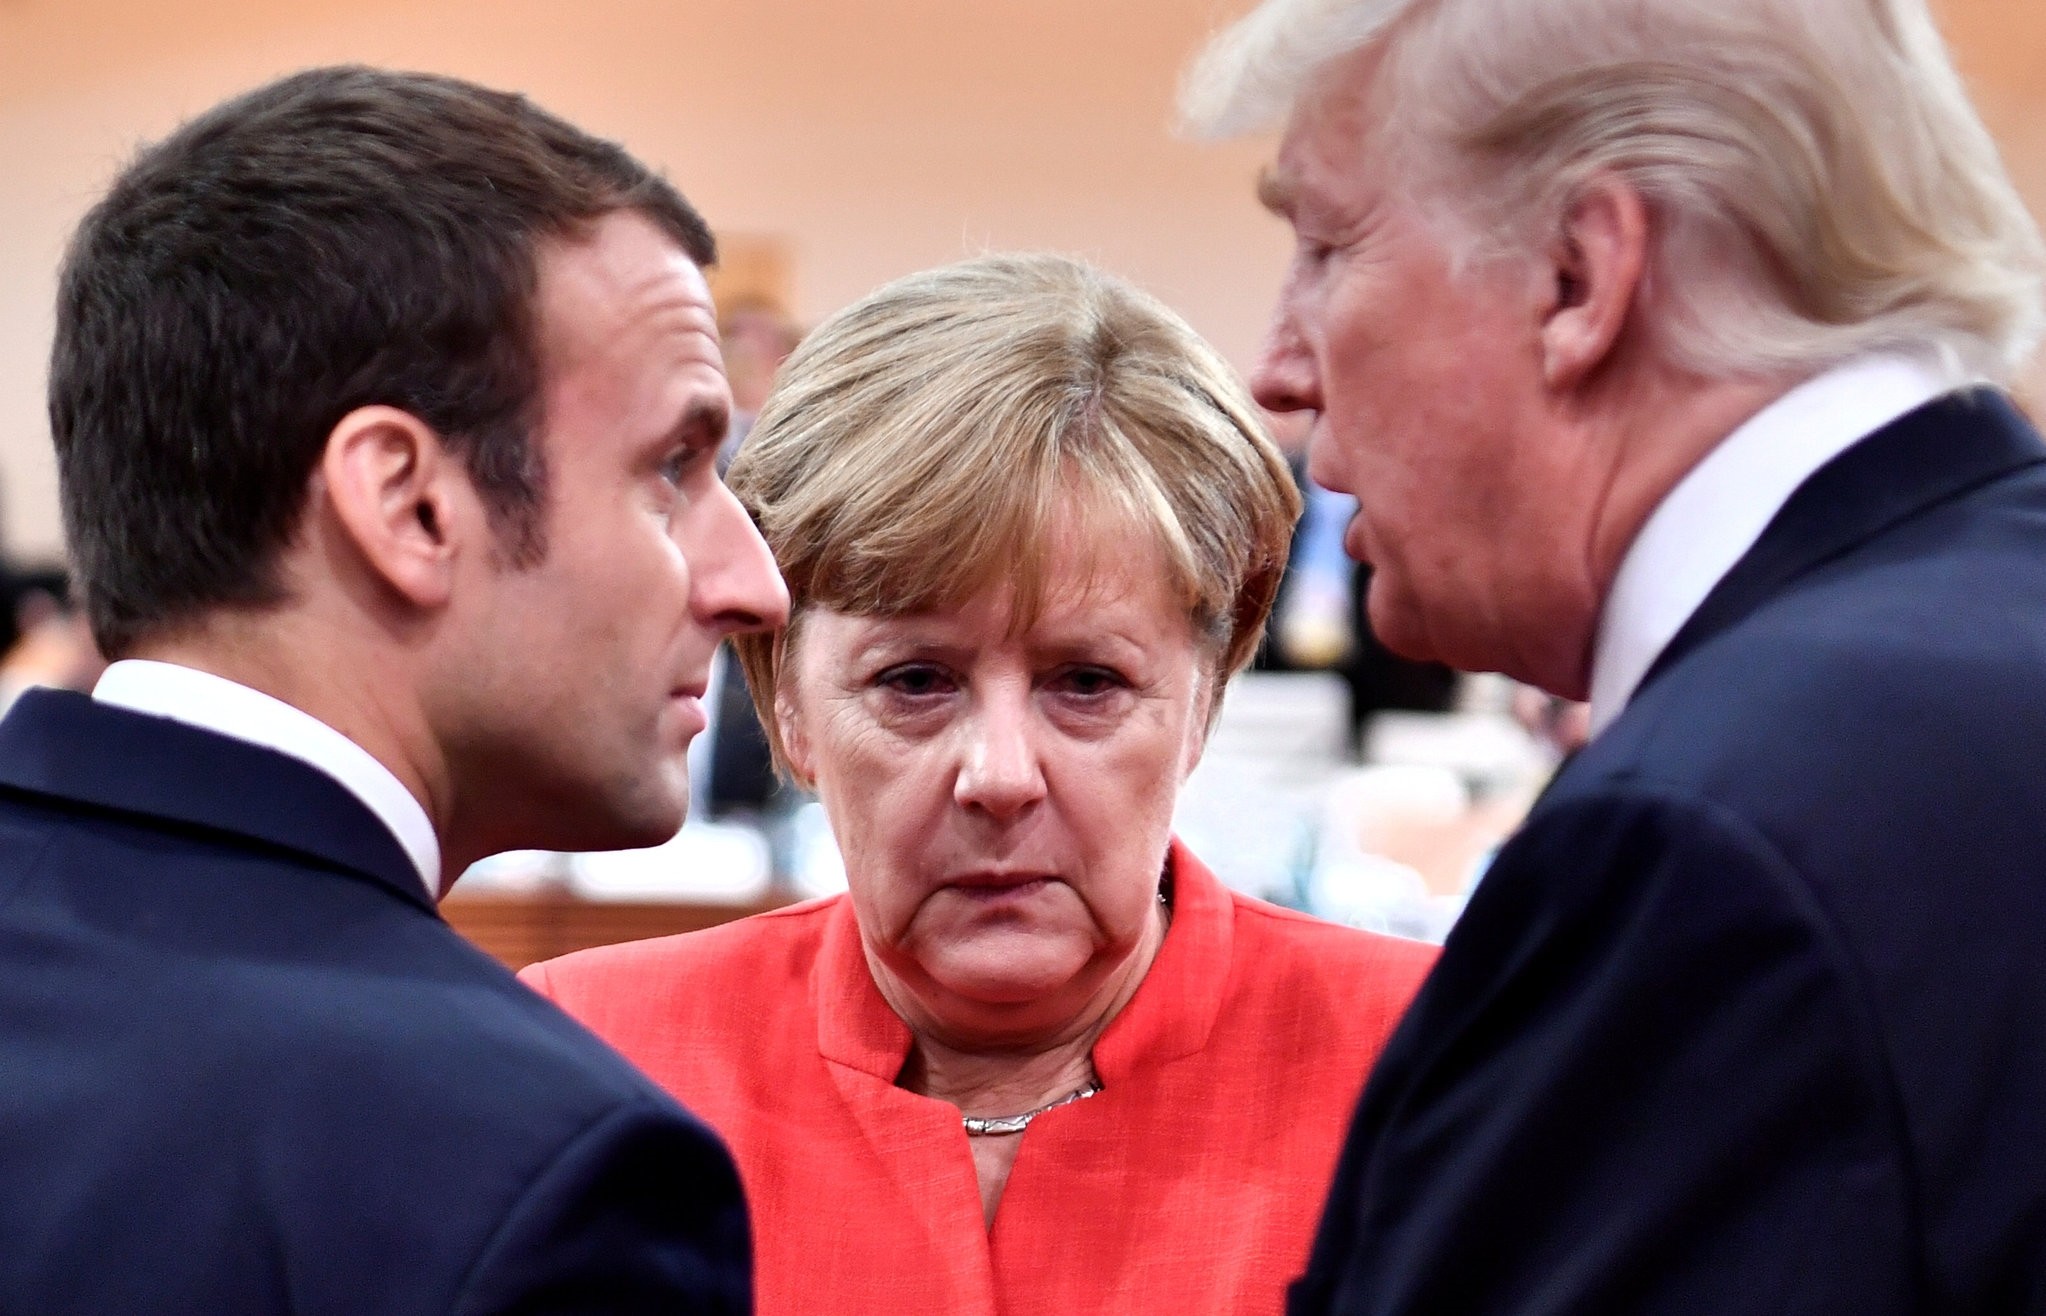 French President Emmanuel Macron, German Chancellor Angela Merkel and U.S. President Donald Trump confer at the start of the first working session of the G20 meeting in Hamburg, July 7, 2017.